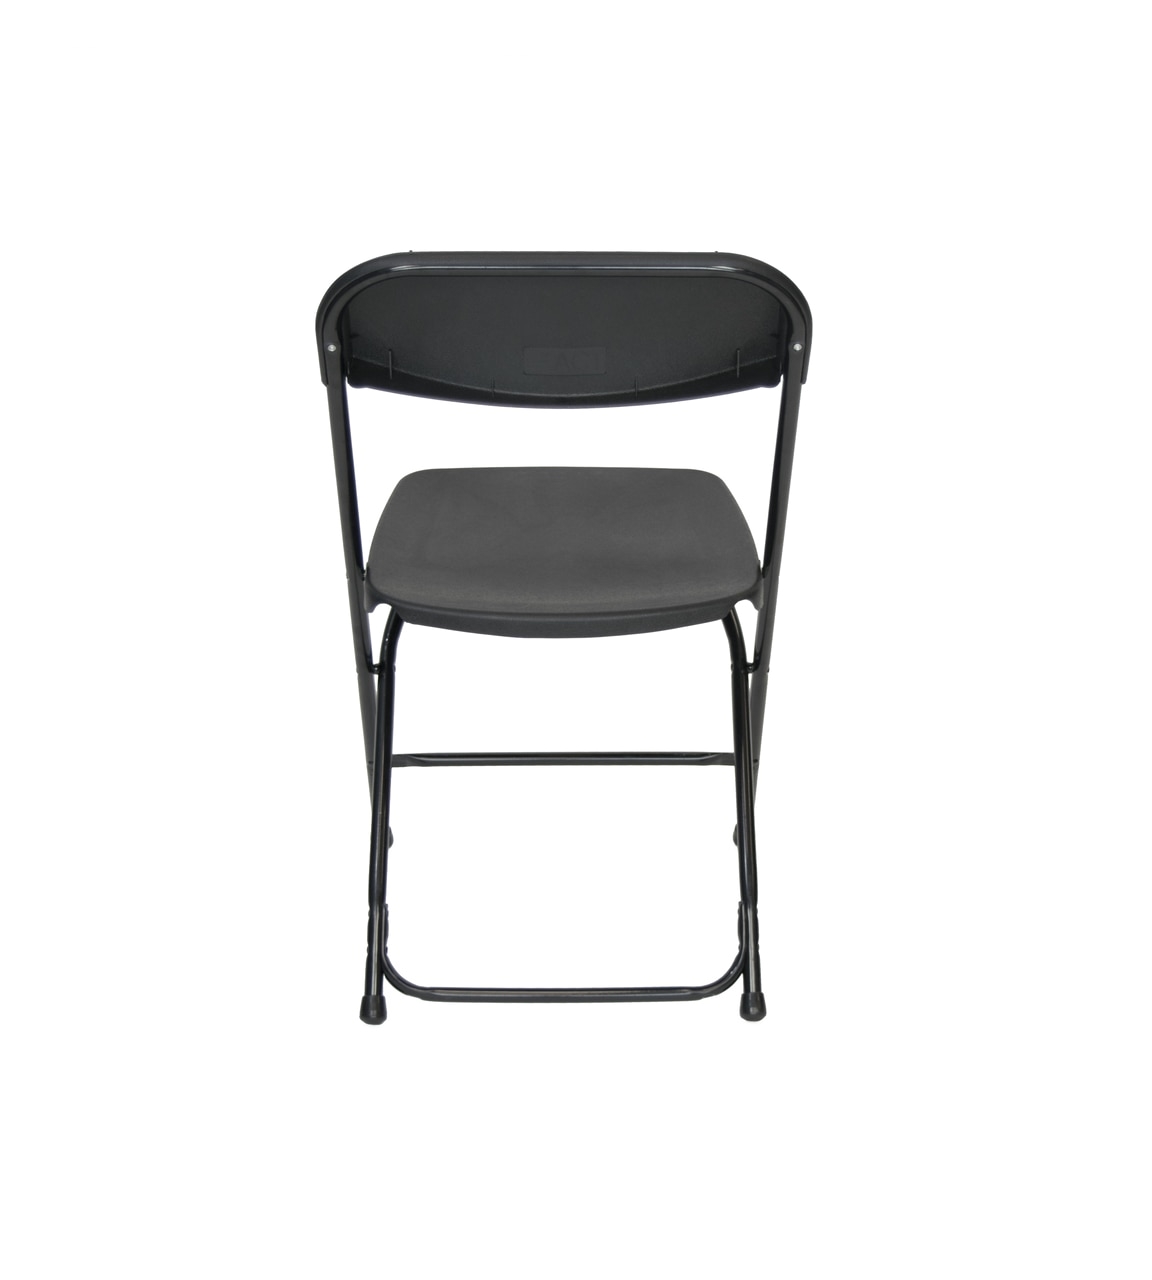 Cheapest Table and Chair Rental Near Me Black Plastic Folding Chair Premium Rental Style